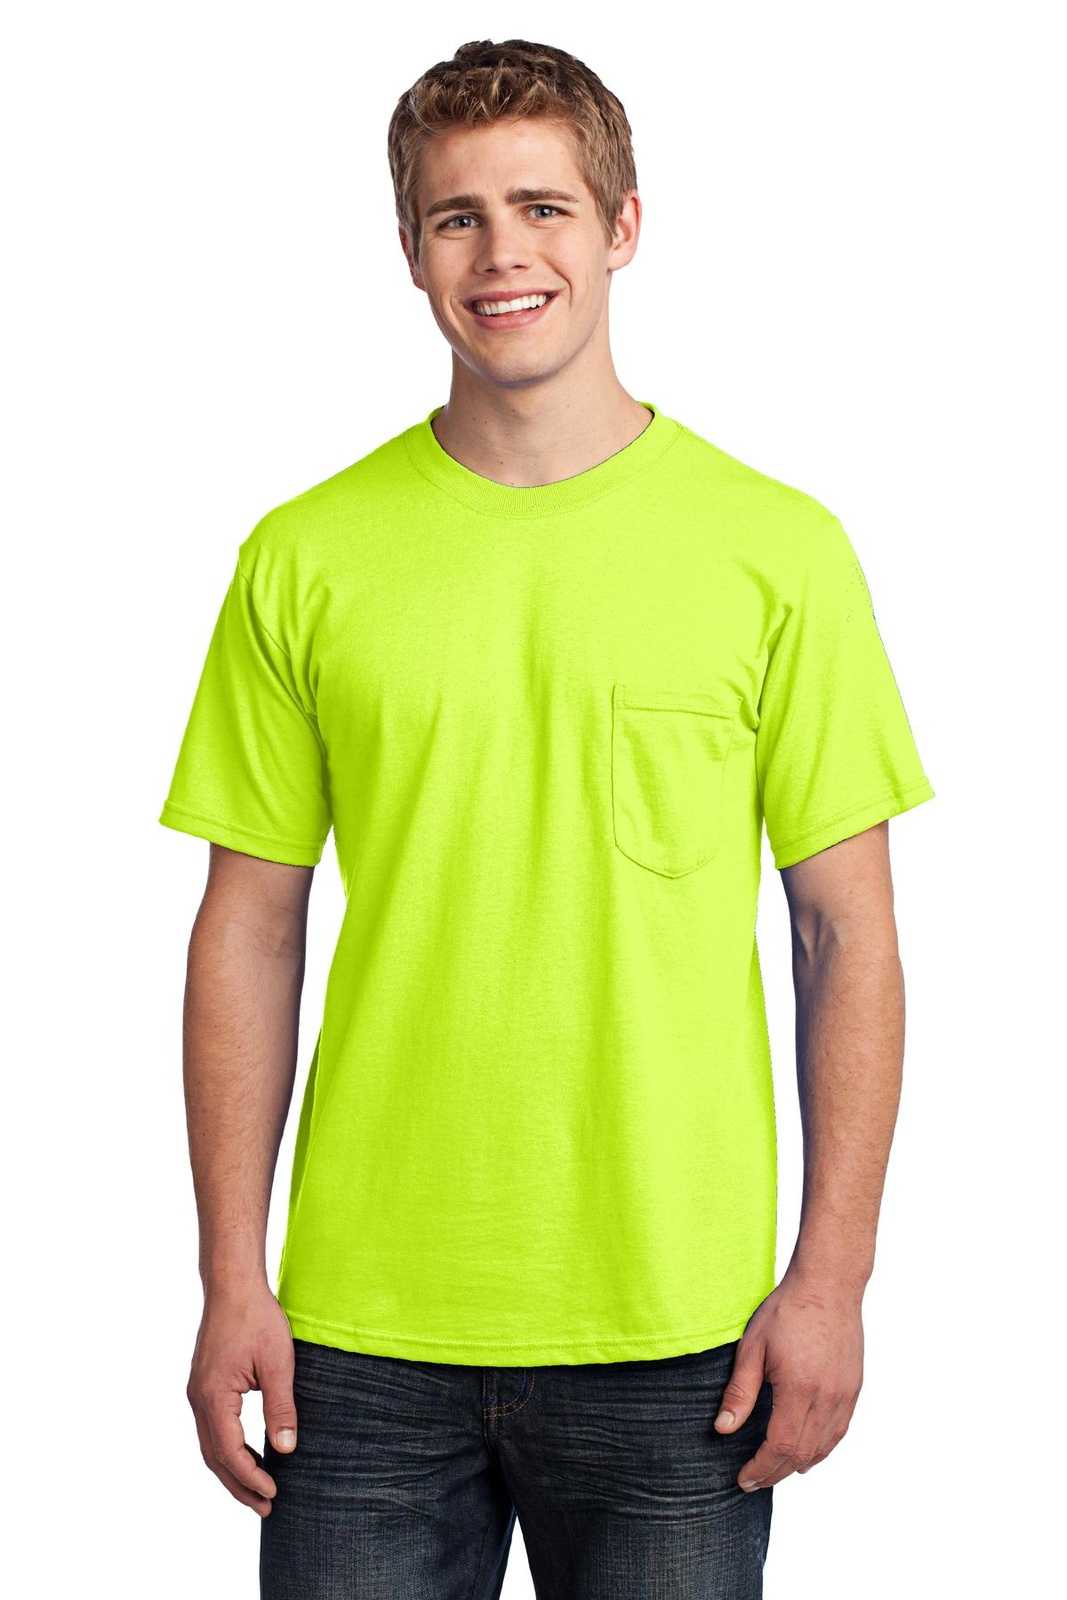 Port &amp; Company USA100P All-American Pocket Tee - Safety Green - HIT a Double - 1